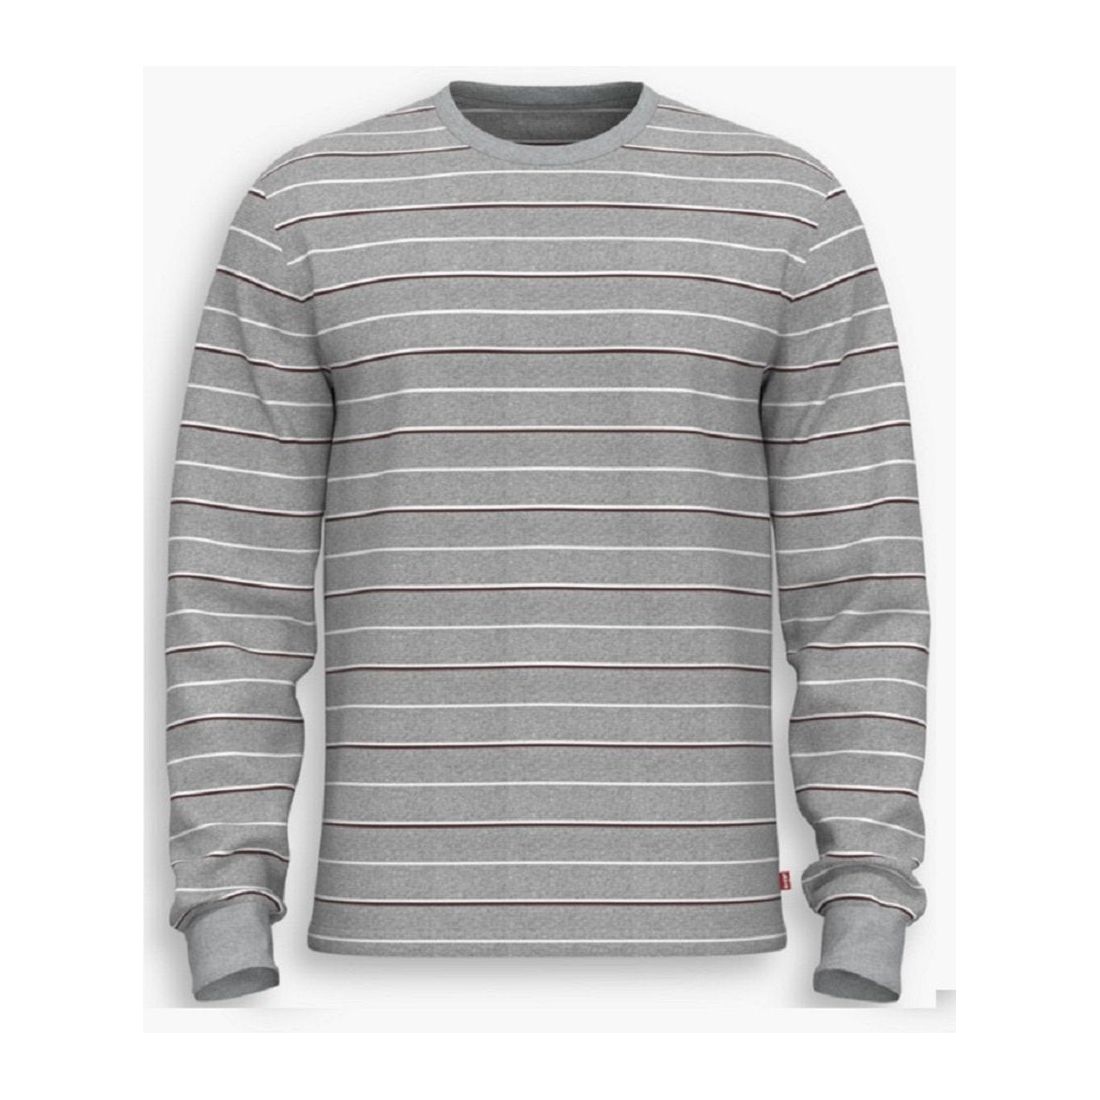 Levi's - Standard Long Sleeve Thermal in Maize Heather Grey Stripe-SQ1440702